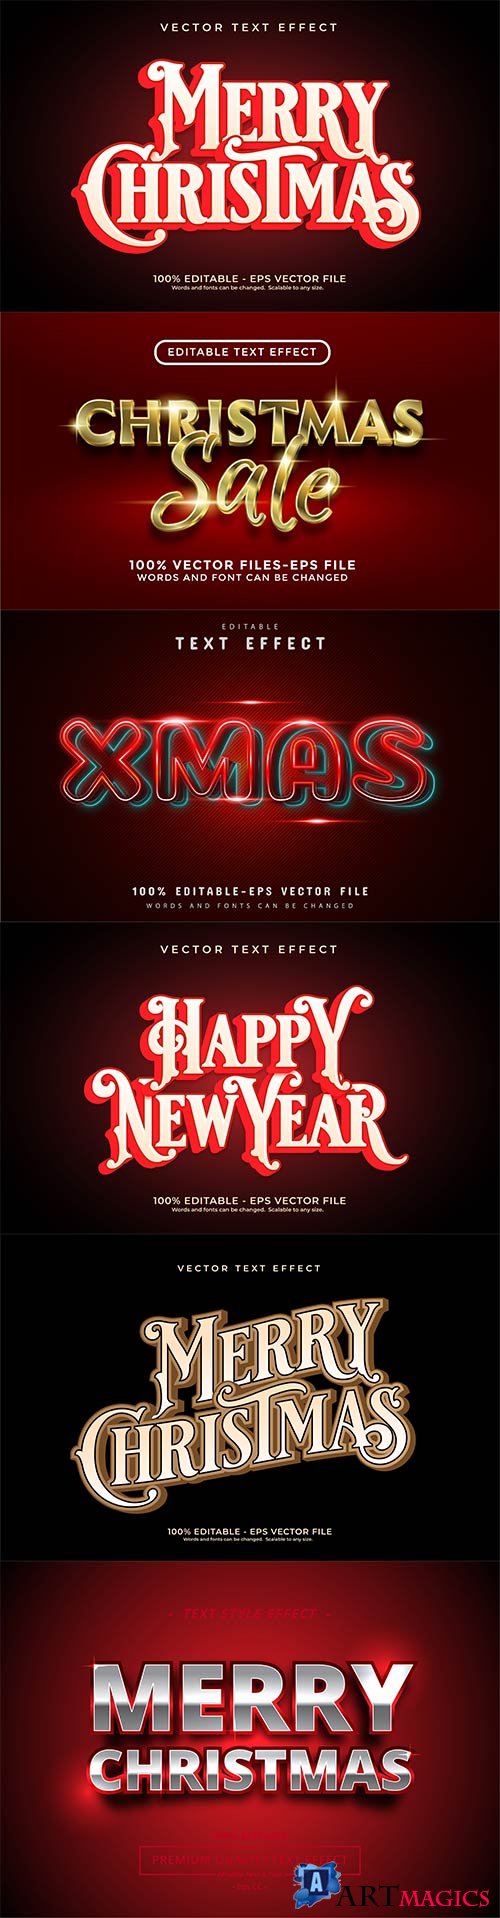 2022 New year and christmas editable text effect vector vol 23